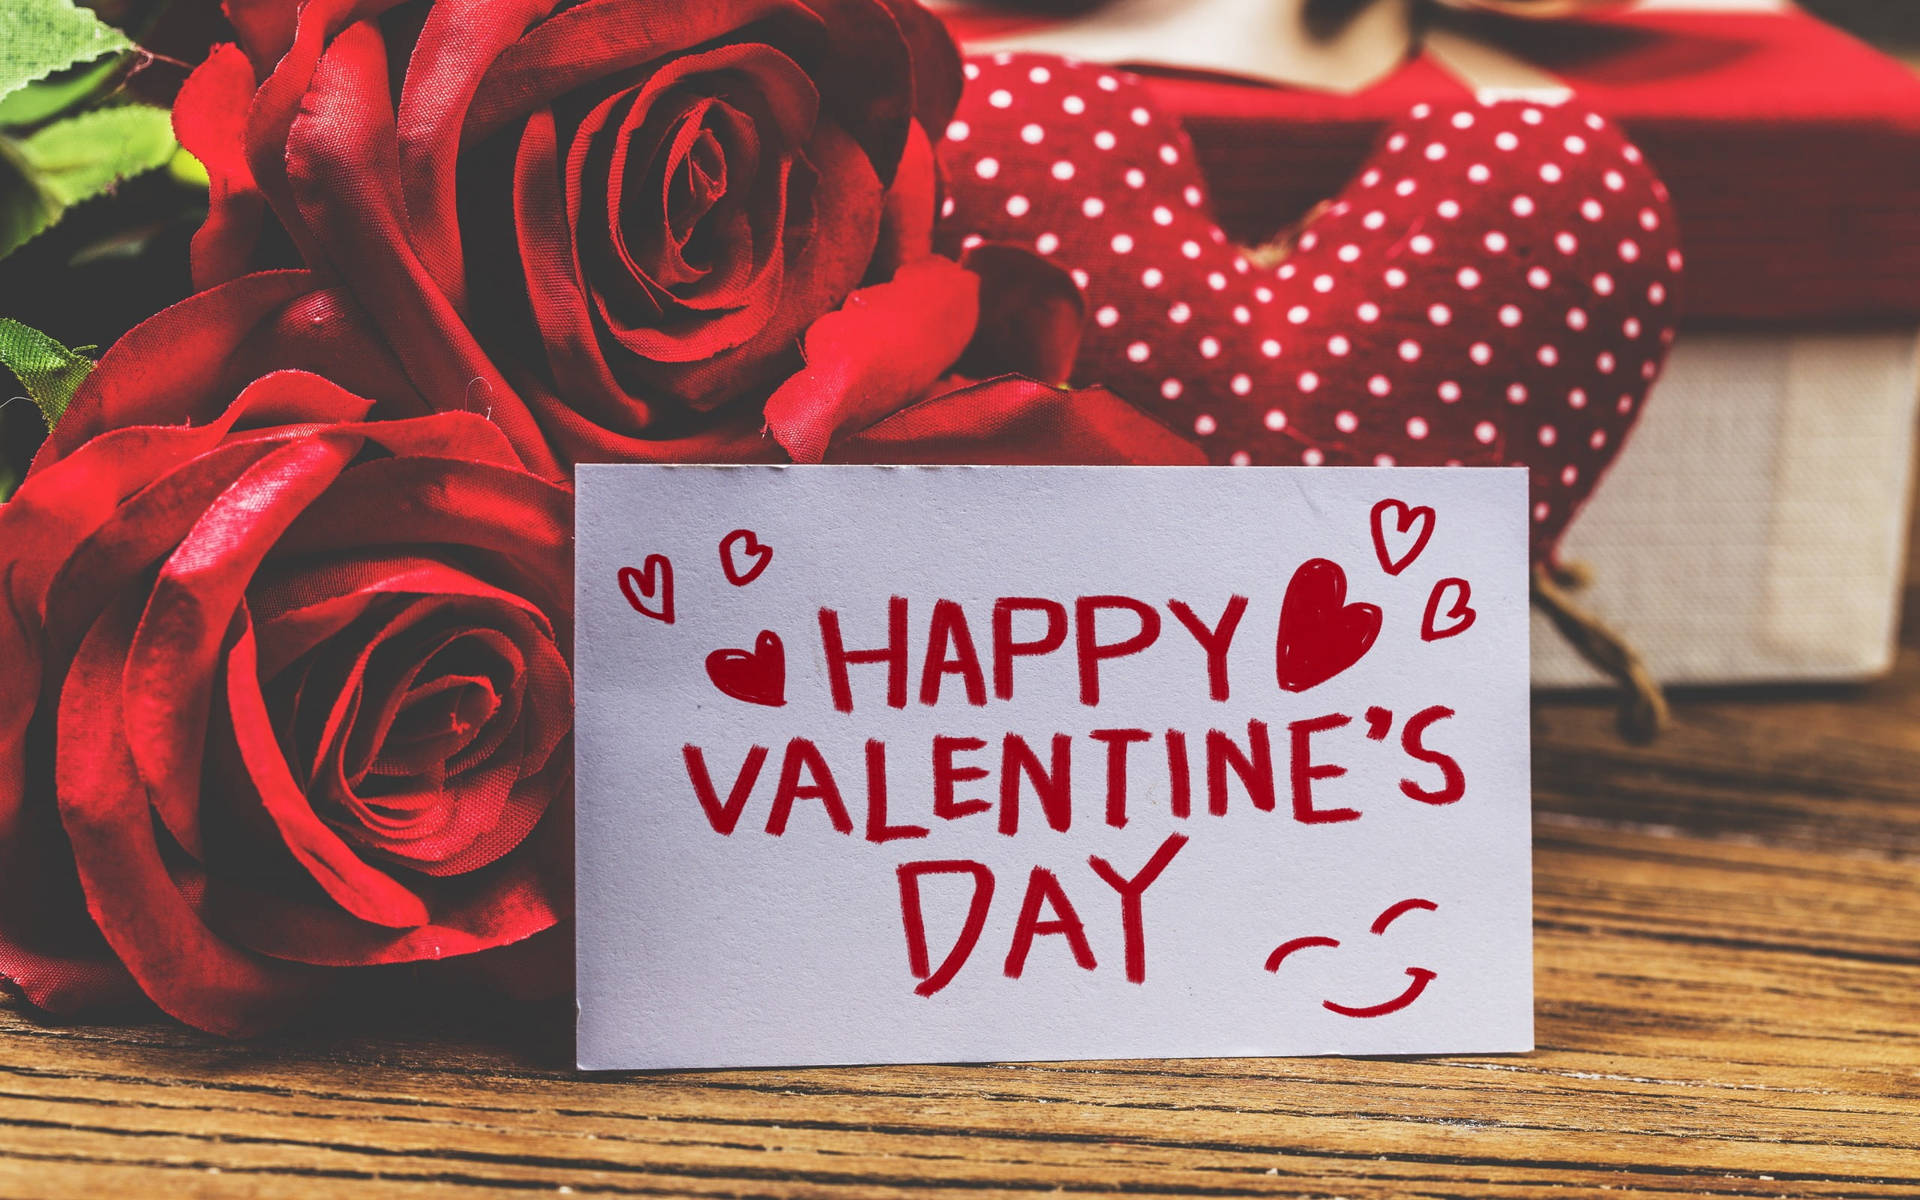 Happy Valentine’s Day Card With Roses Background